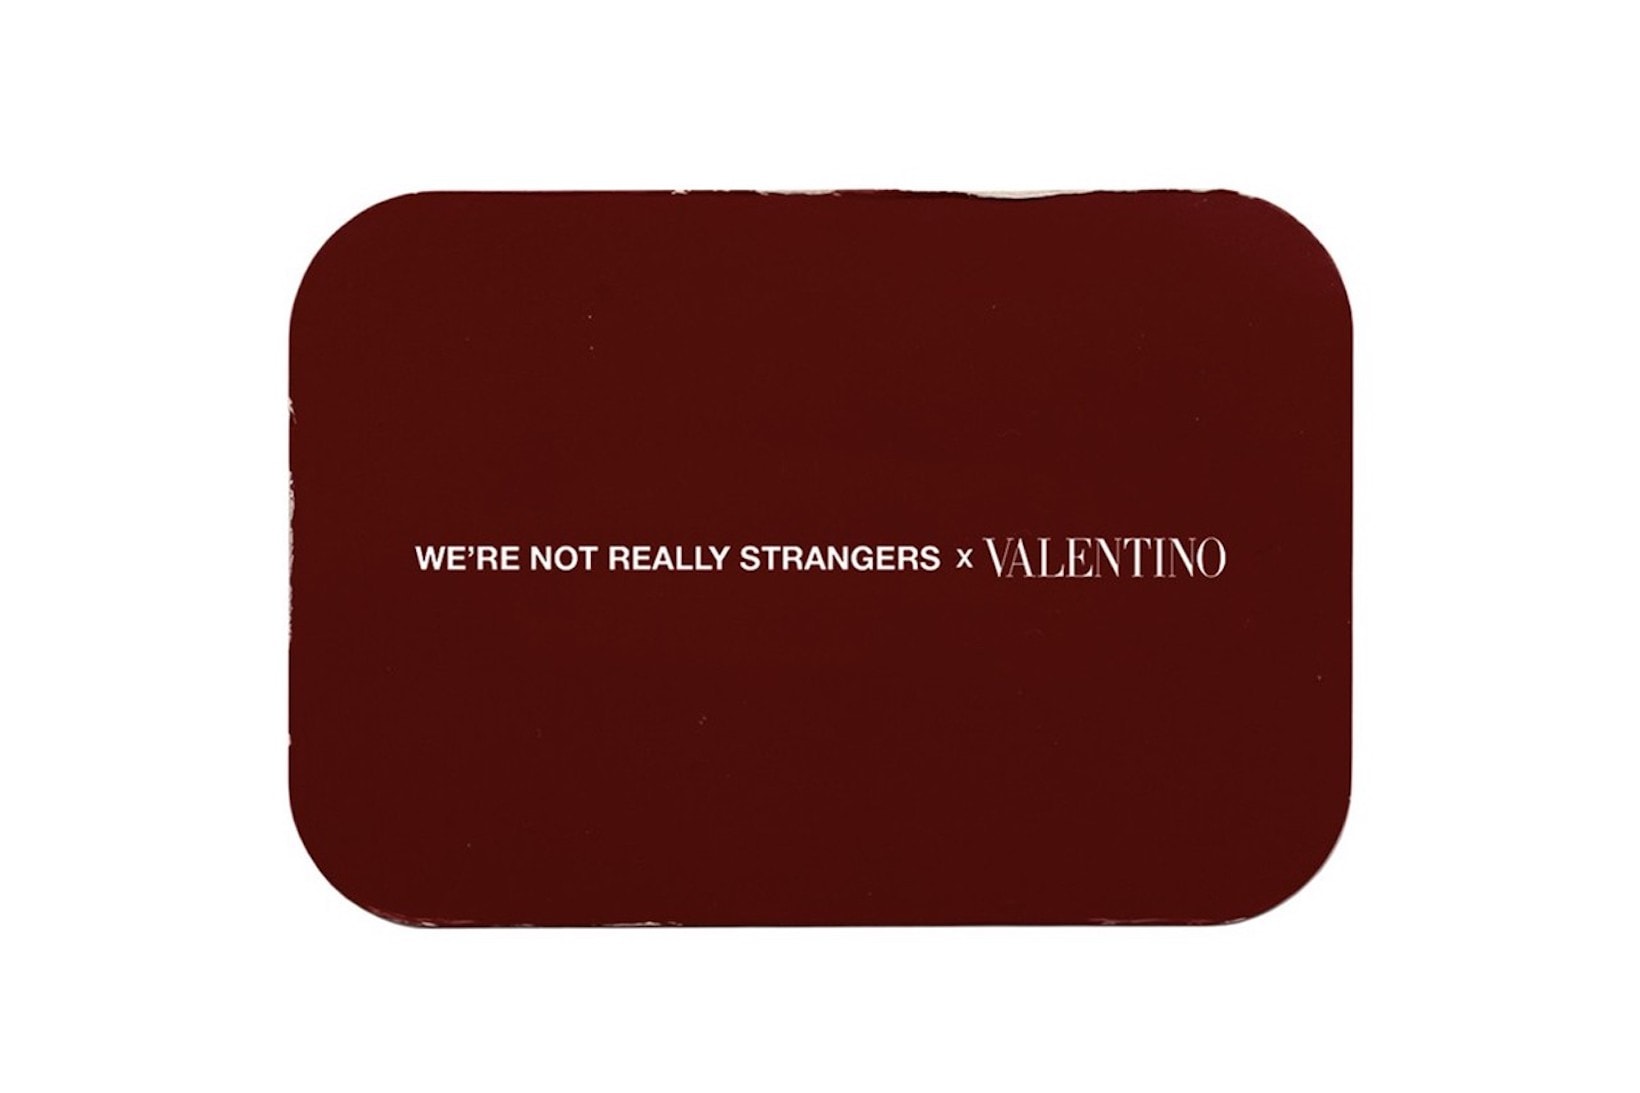 were not really strangers koreen valentino collaboration card game maroon red